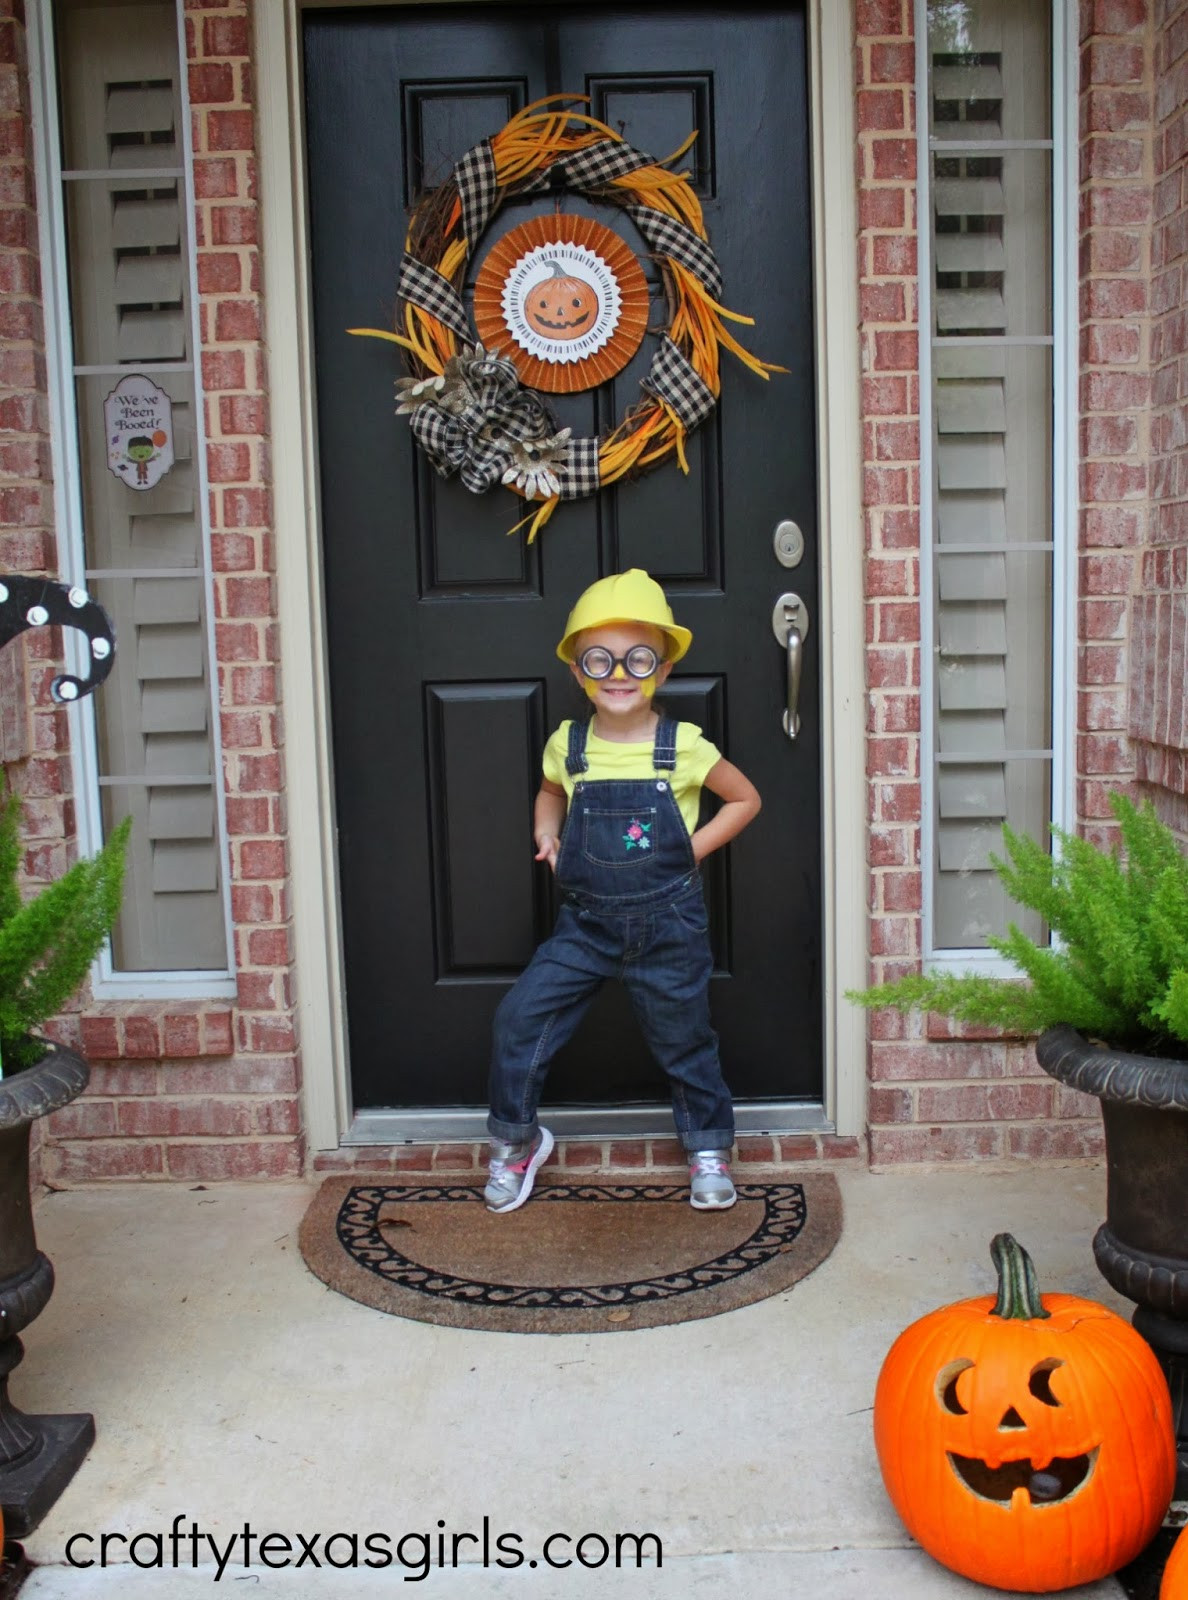 DIY Minion Costume Without Overalls
 Crafty Texas Girls DIY Minion Costume